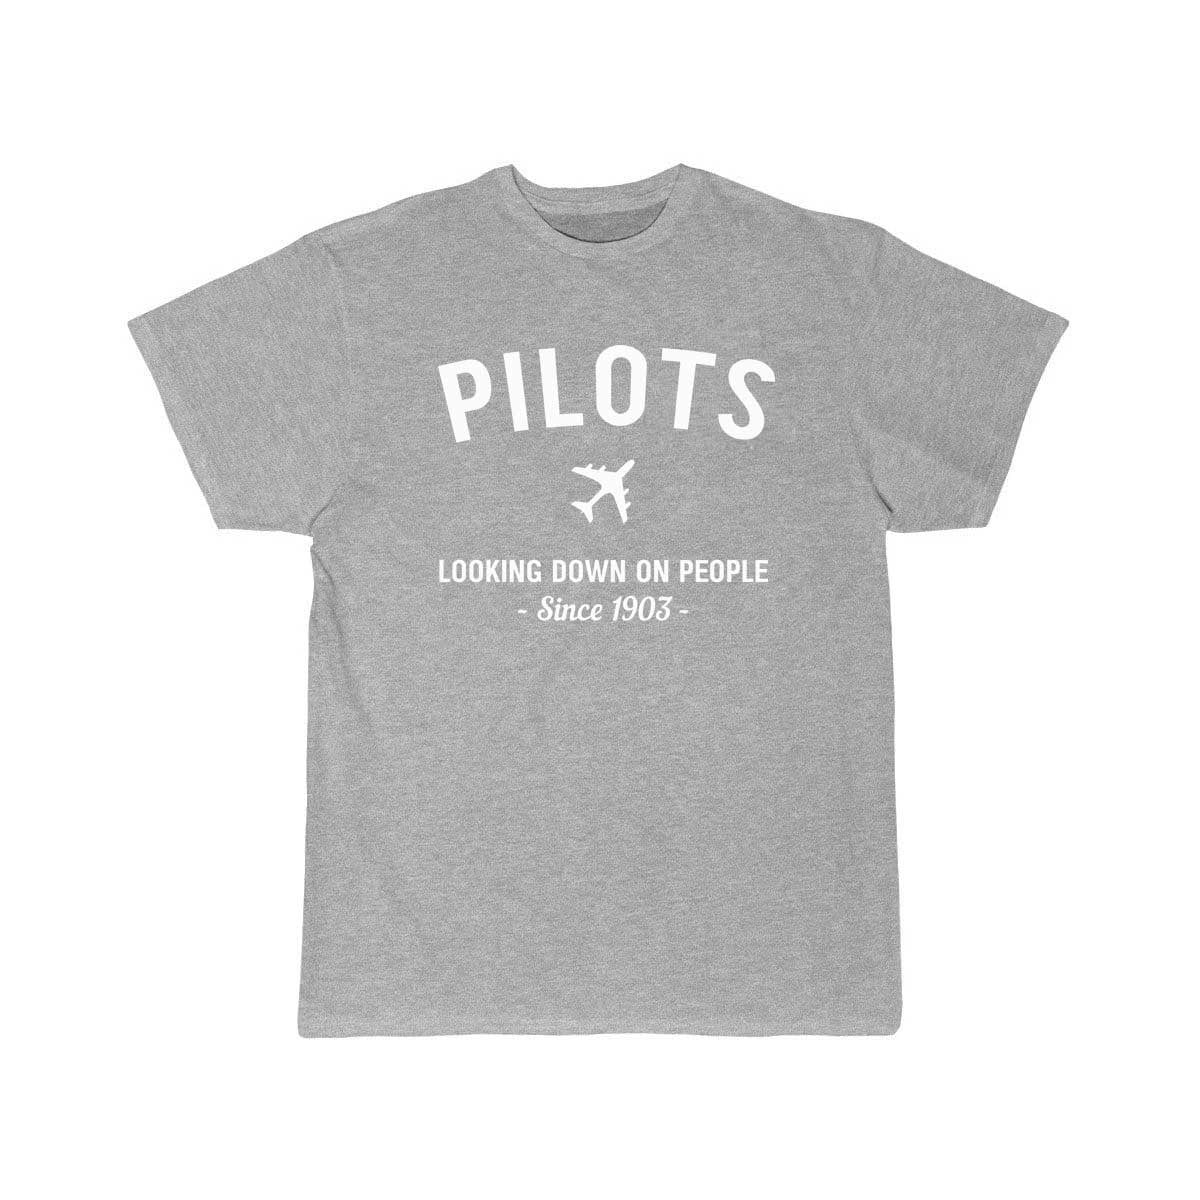 Pilots. Looking down on people since 1903 T-SHIRT THE AV8R